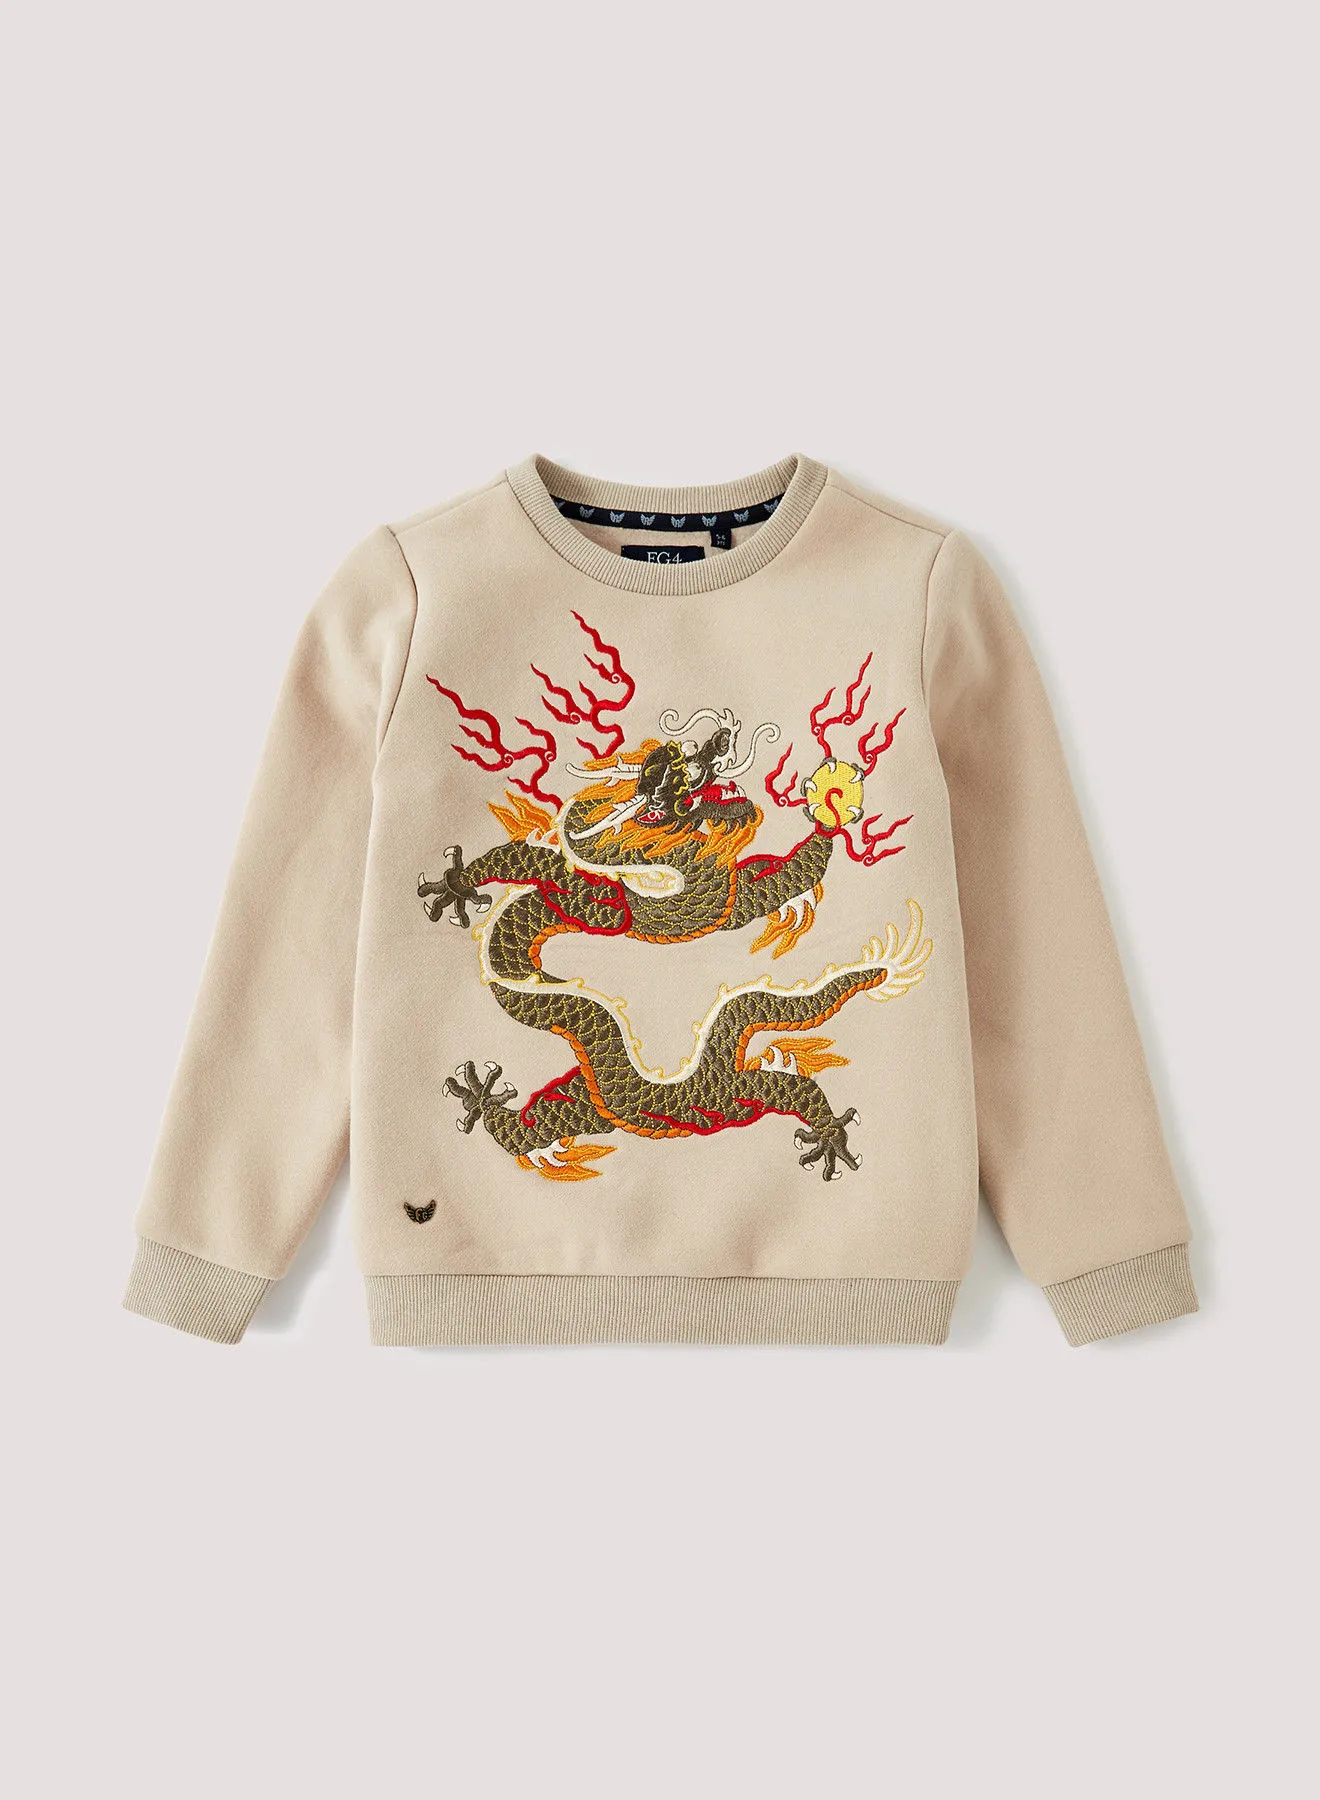 FG4 Kids FG4 Peter Dragon Sweat in soft jersey fabric with embroidered dragon graphic